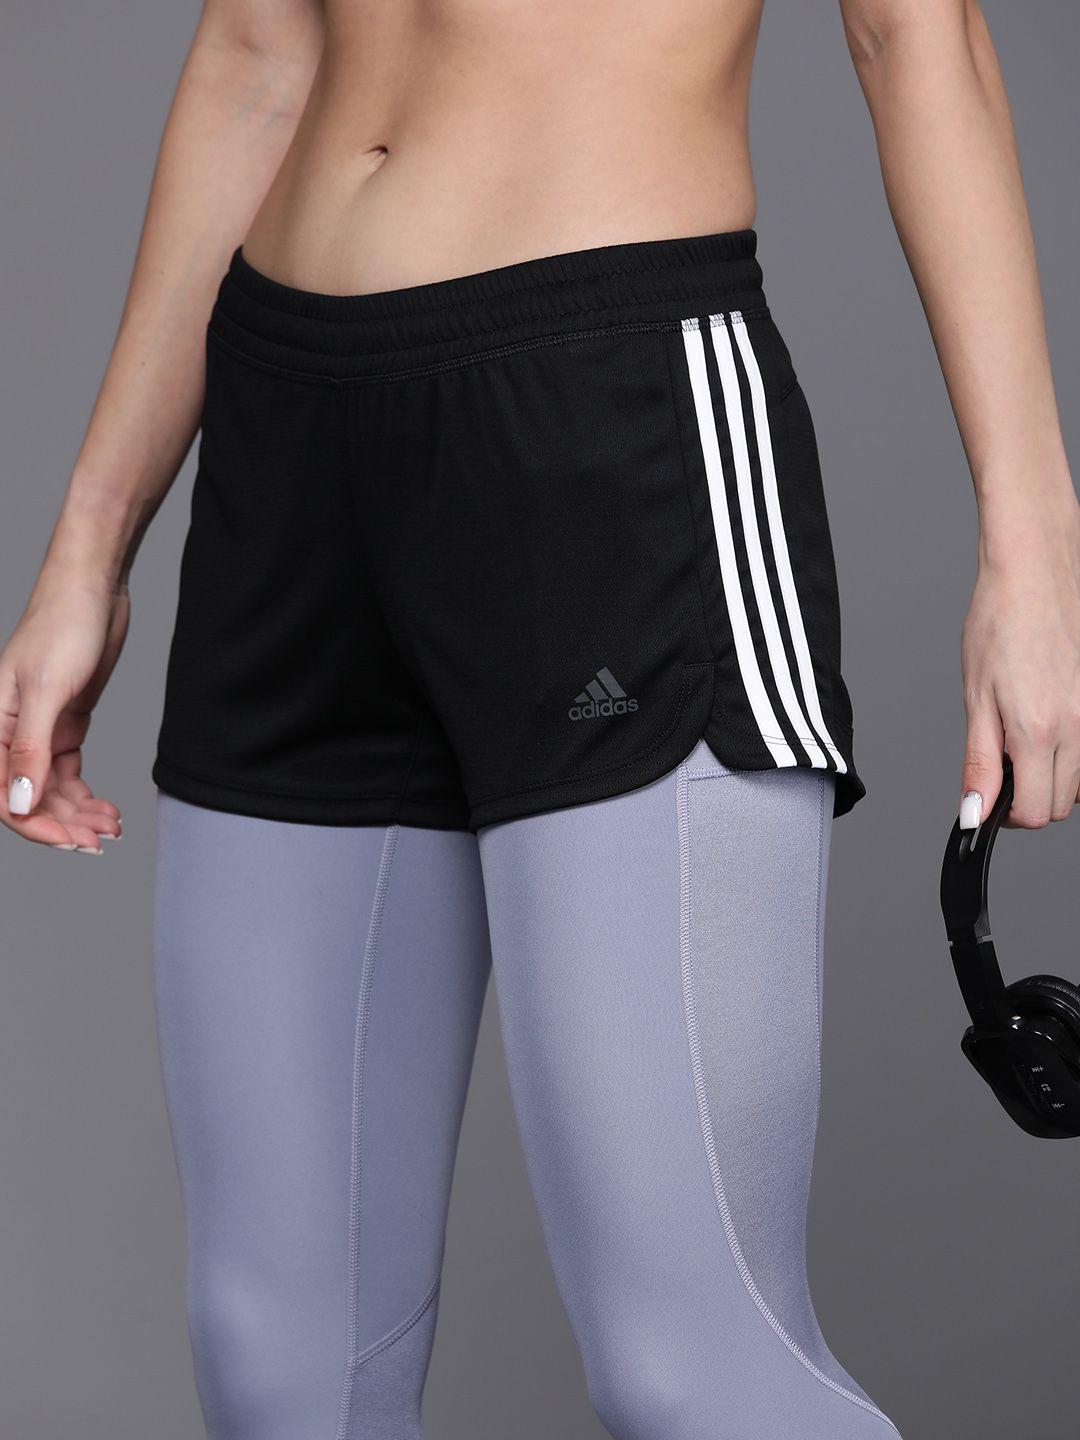 adidas women pacer 3-stripes knit shorts